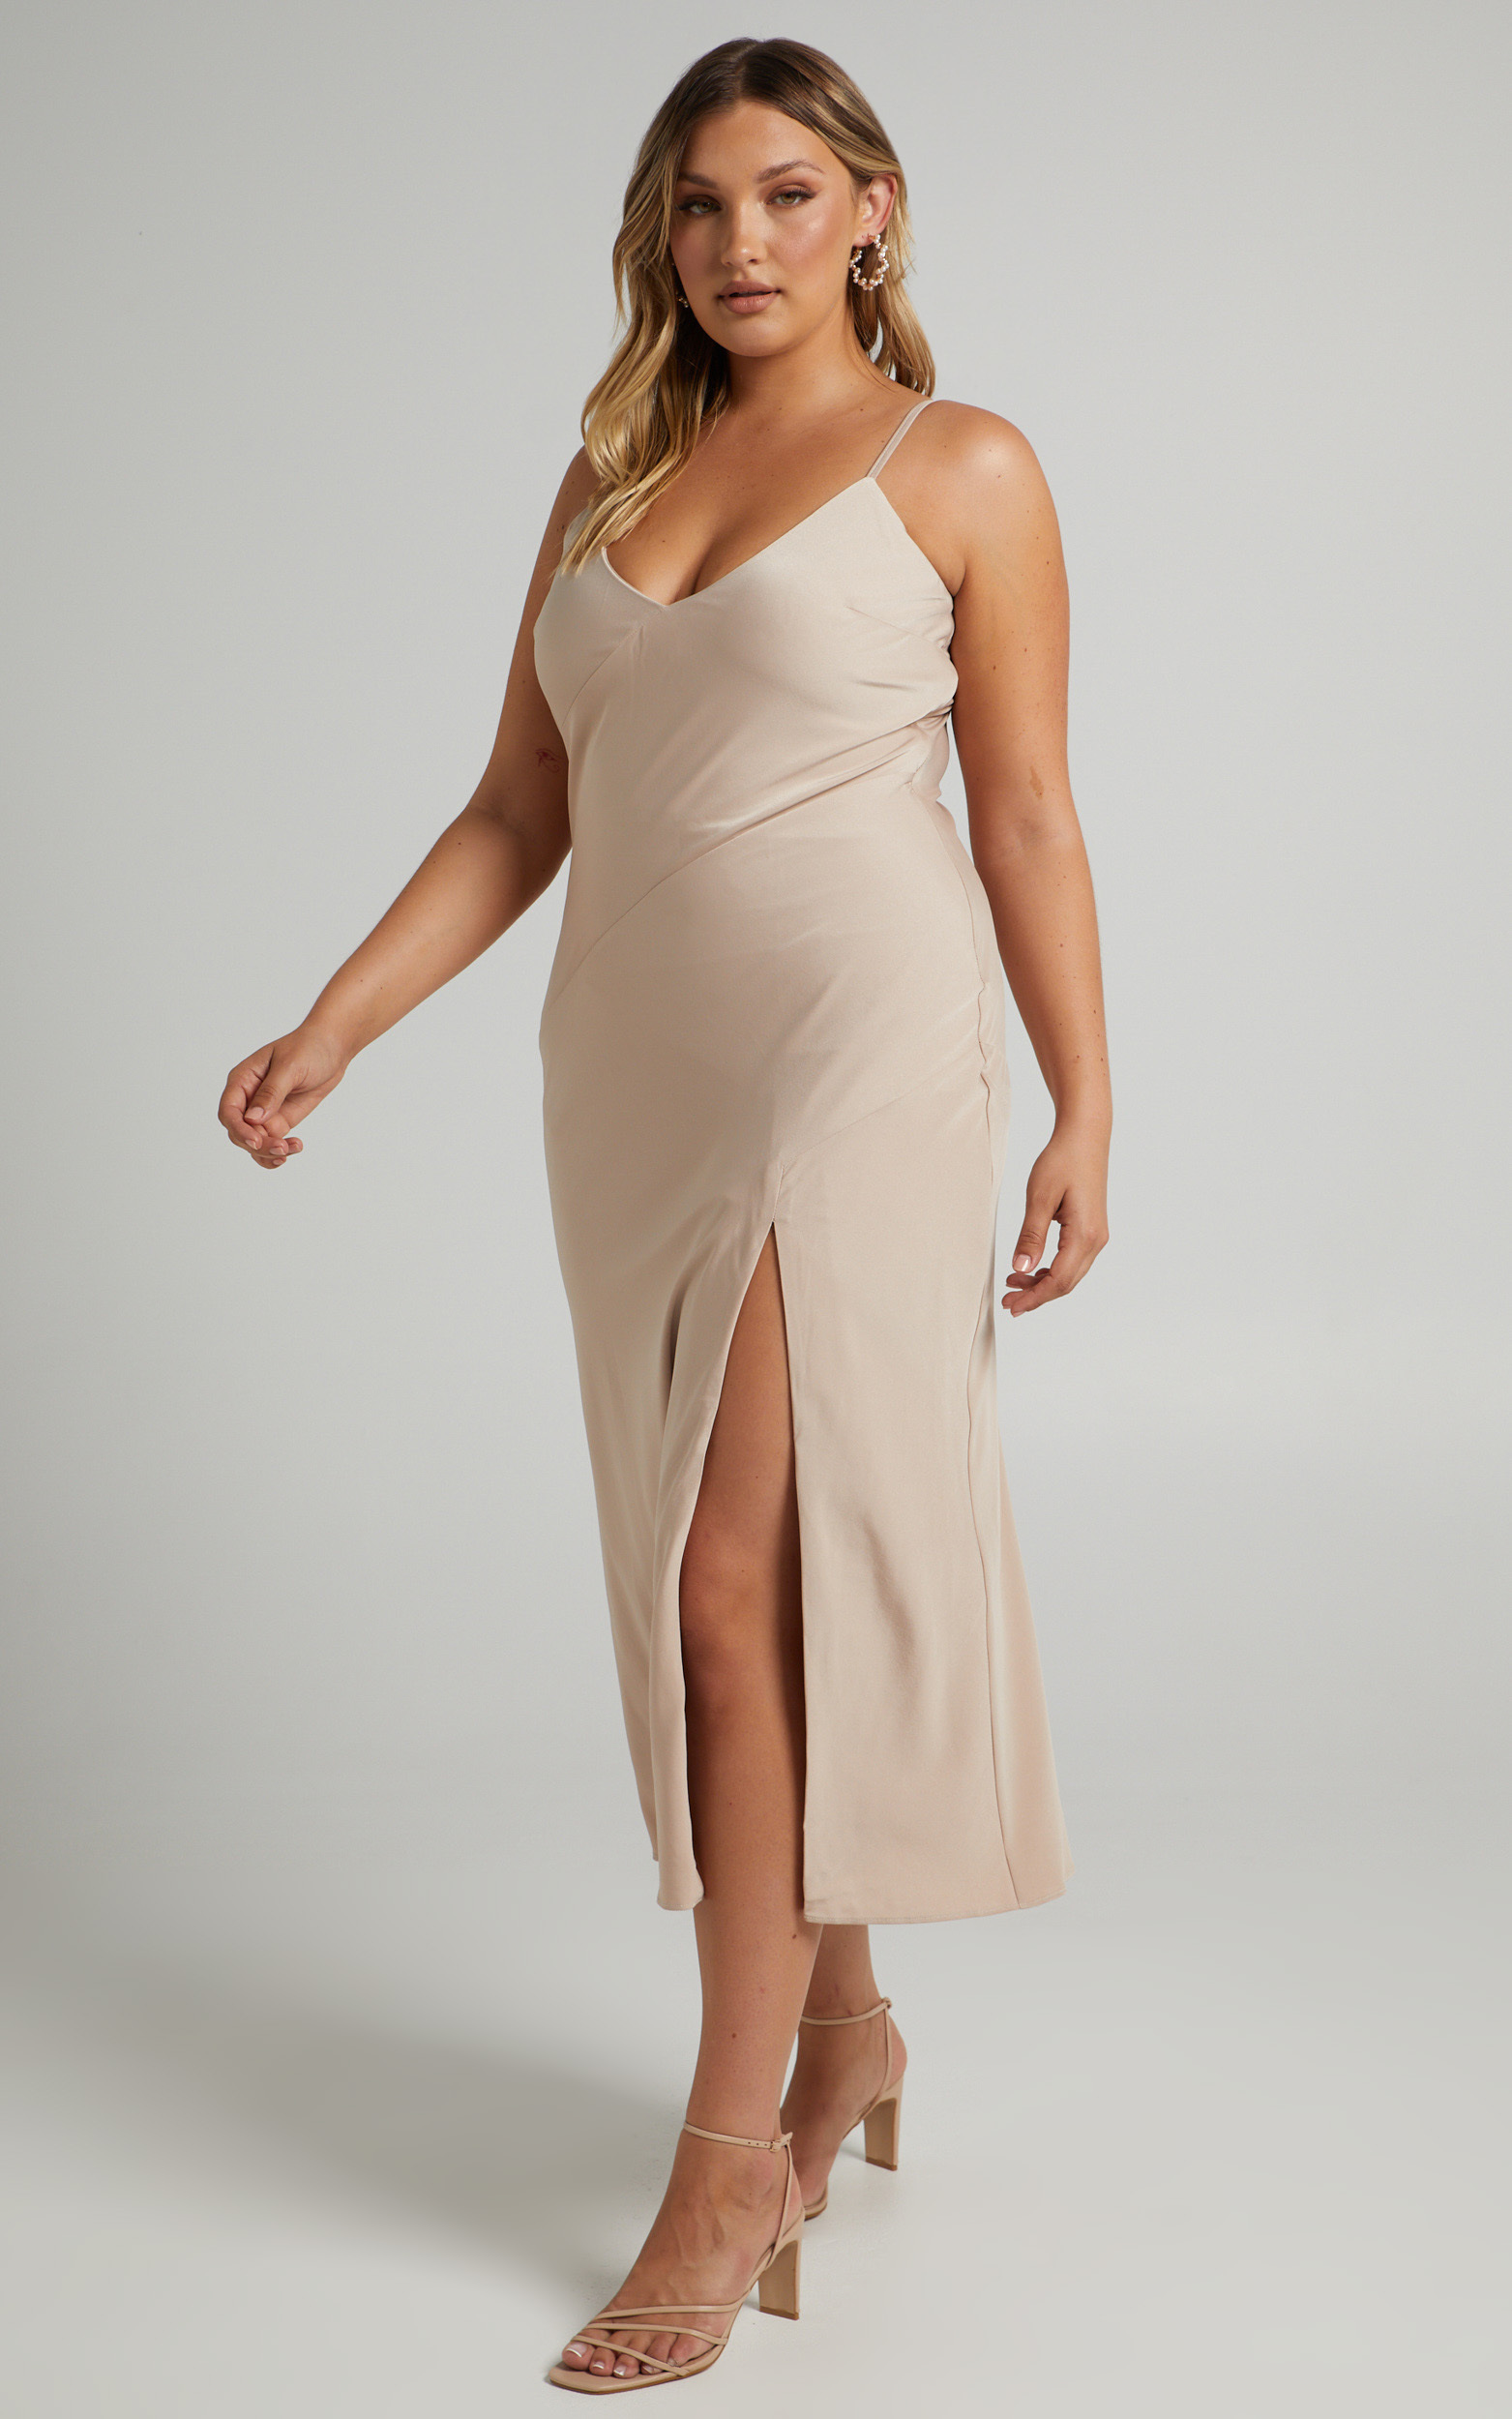 Luminescent Lover Bias Cut V Neck Midi Dress in Champagne - 04, NEU2, hi-res image number null